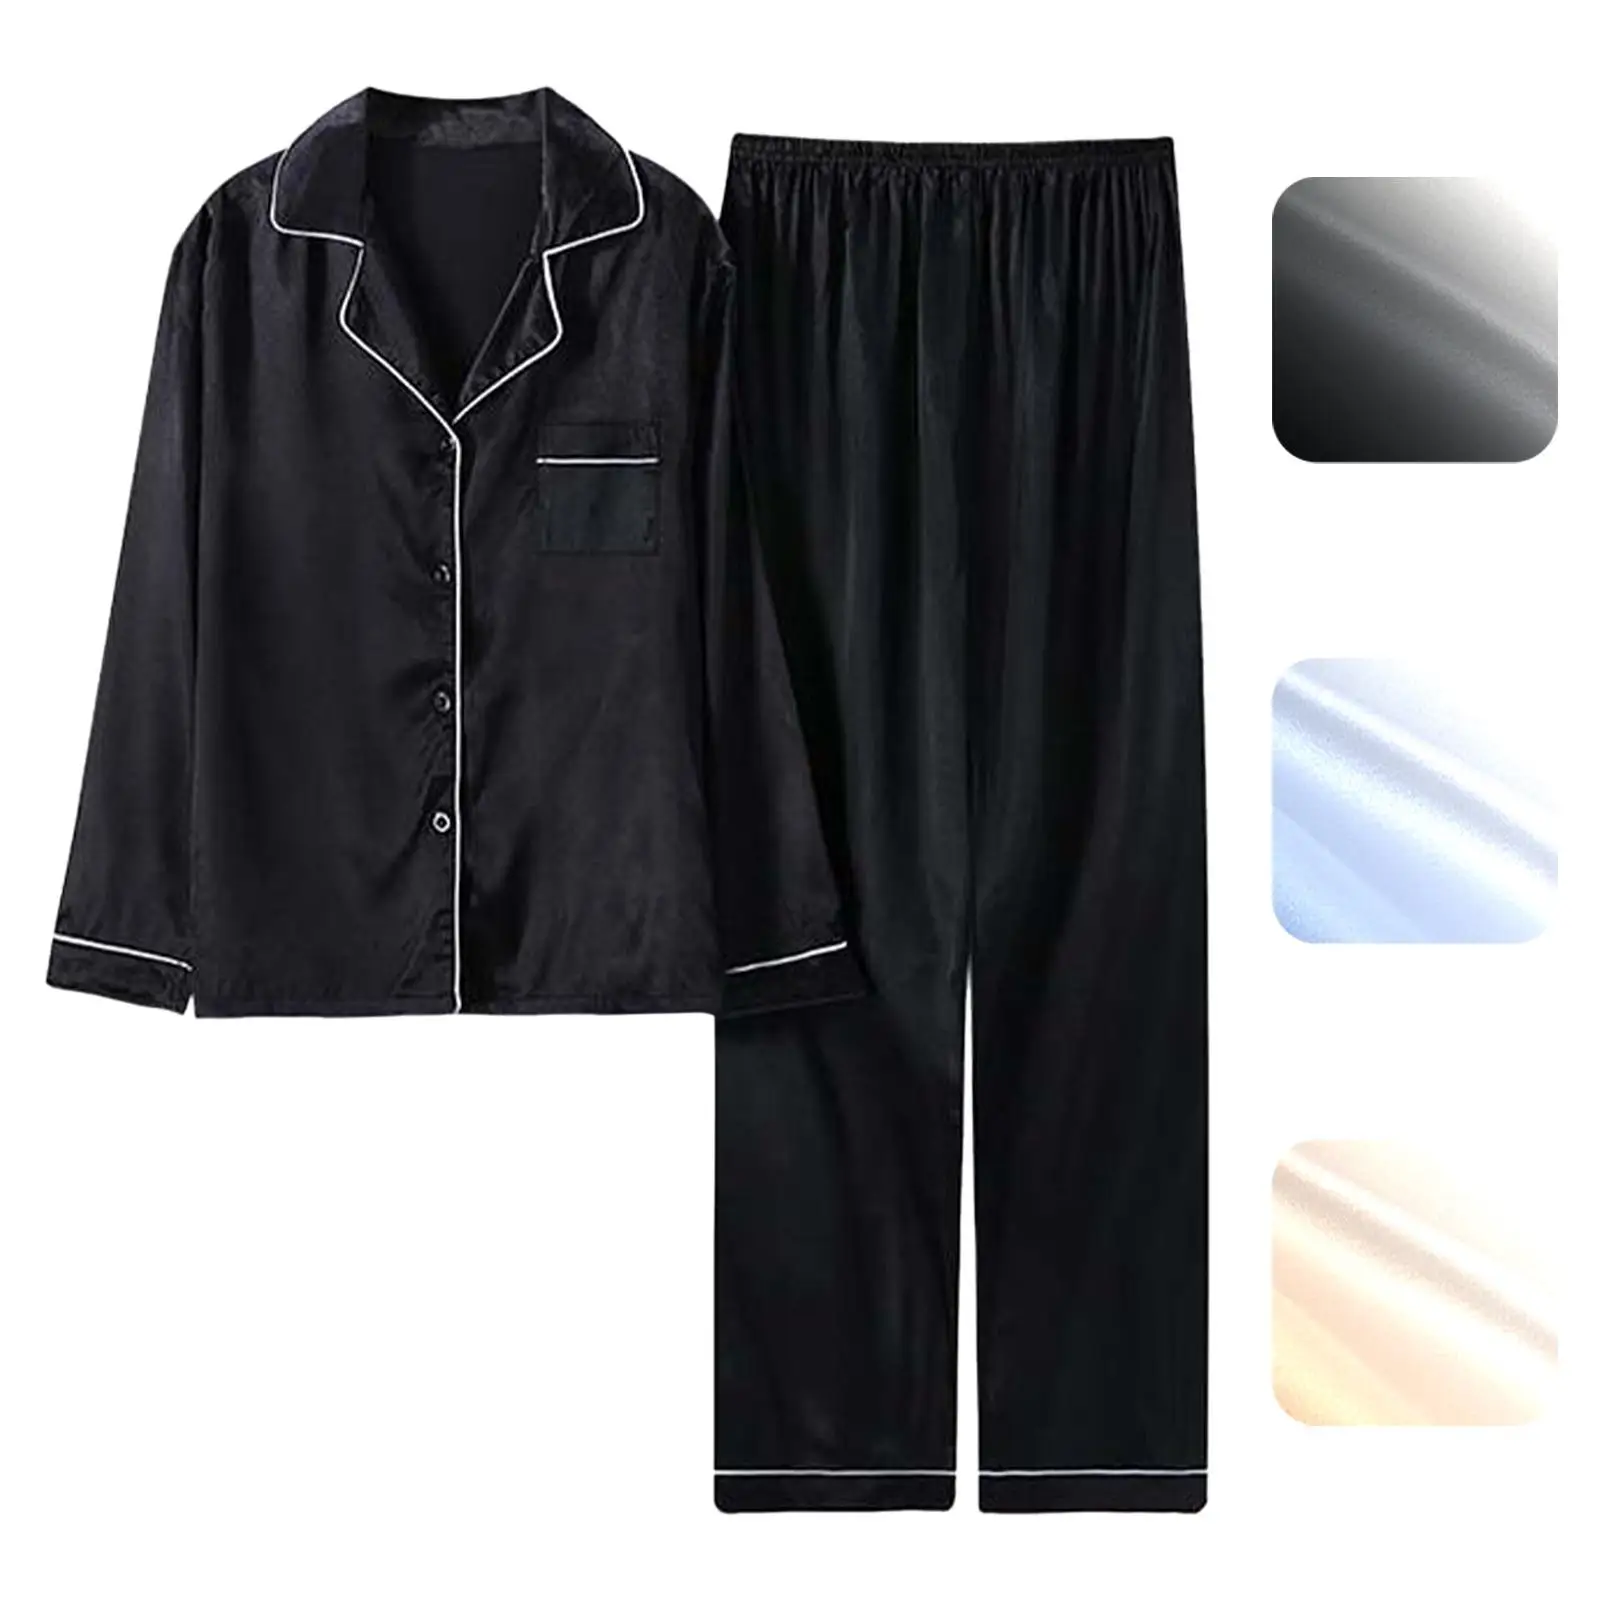 Men Sleepwear Pajamas Set,  Breathable Classic Full Length Sleeve Turn Down Collar Fashion Casual  Clothes for Gift Father